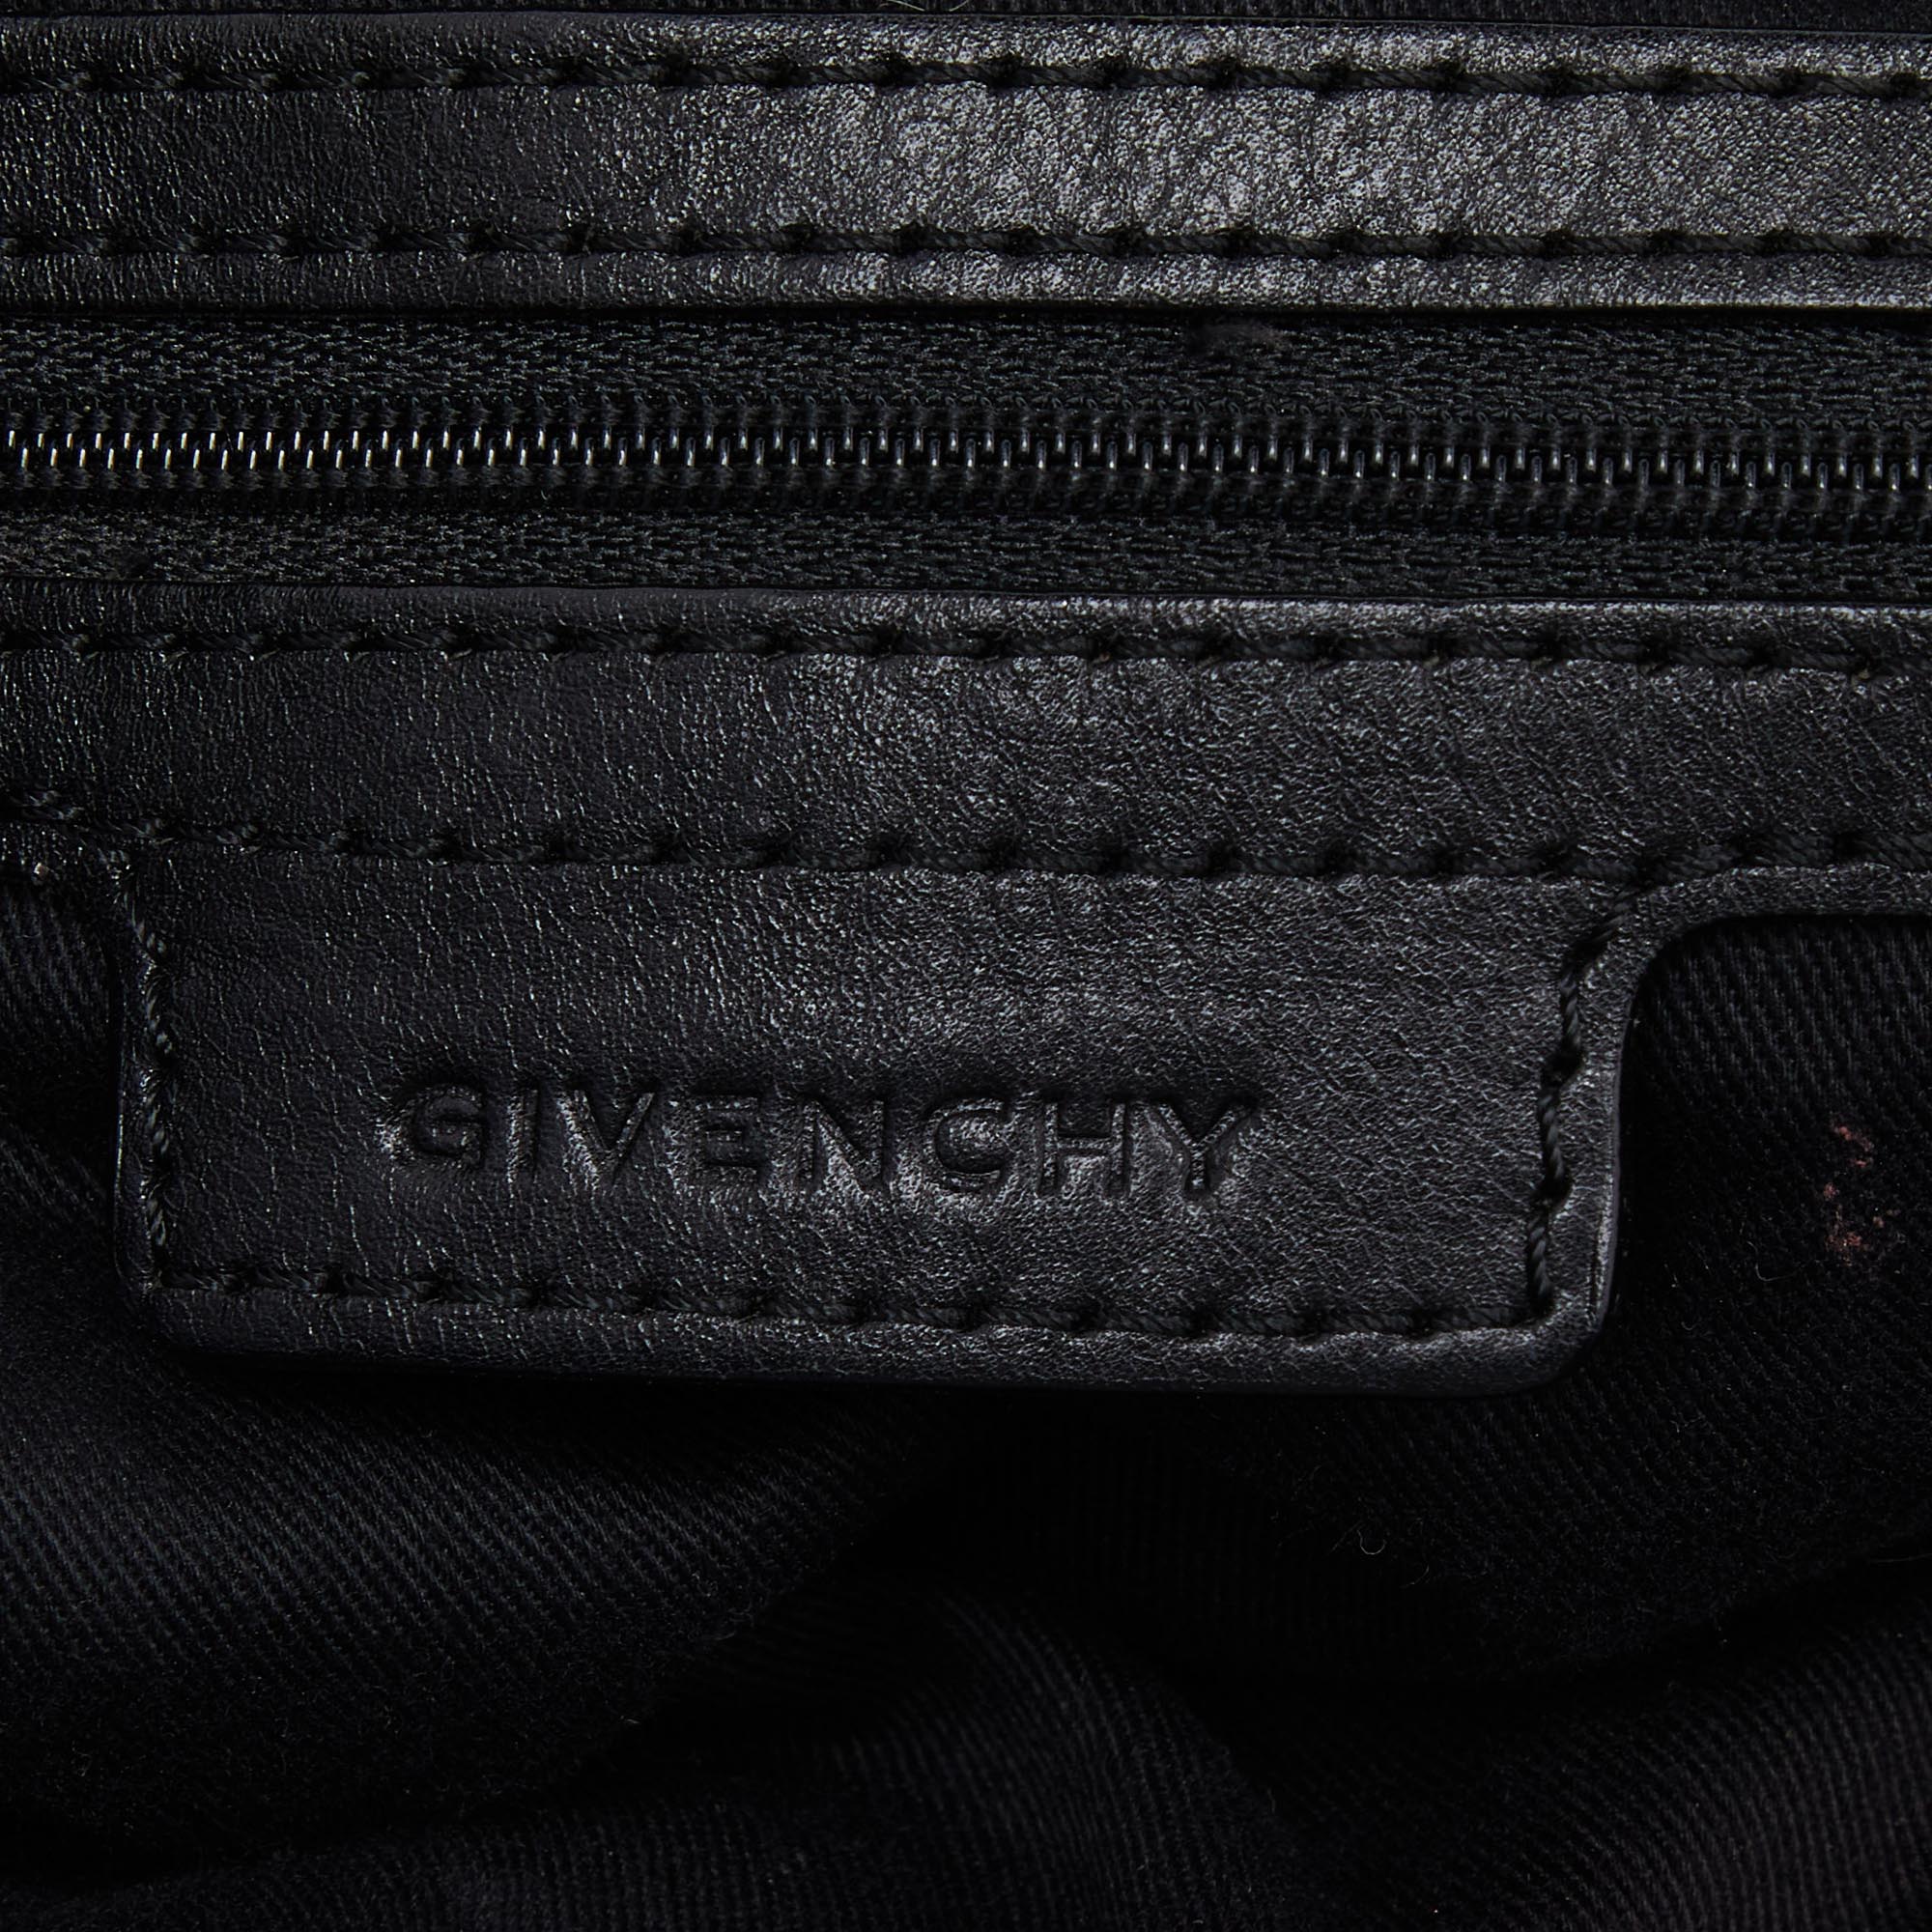 Givenchy Black Monogram Canvas And Leather Hobo